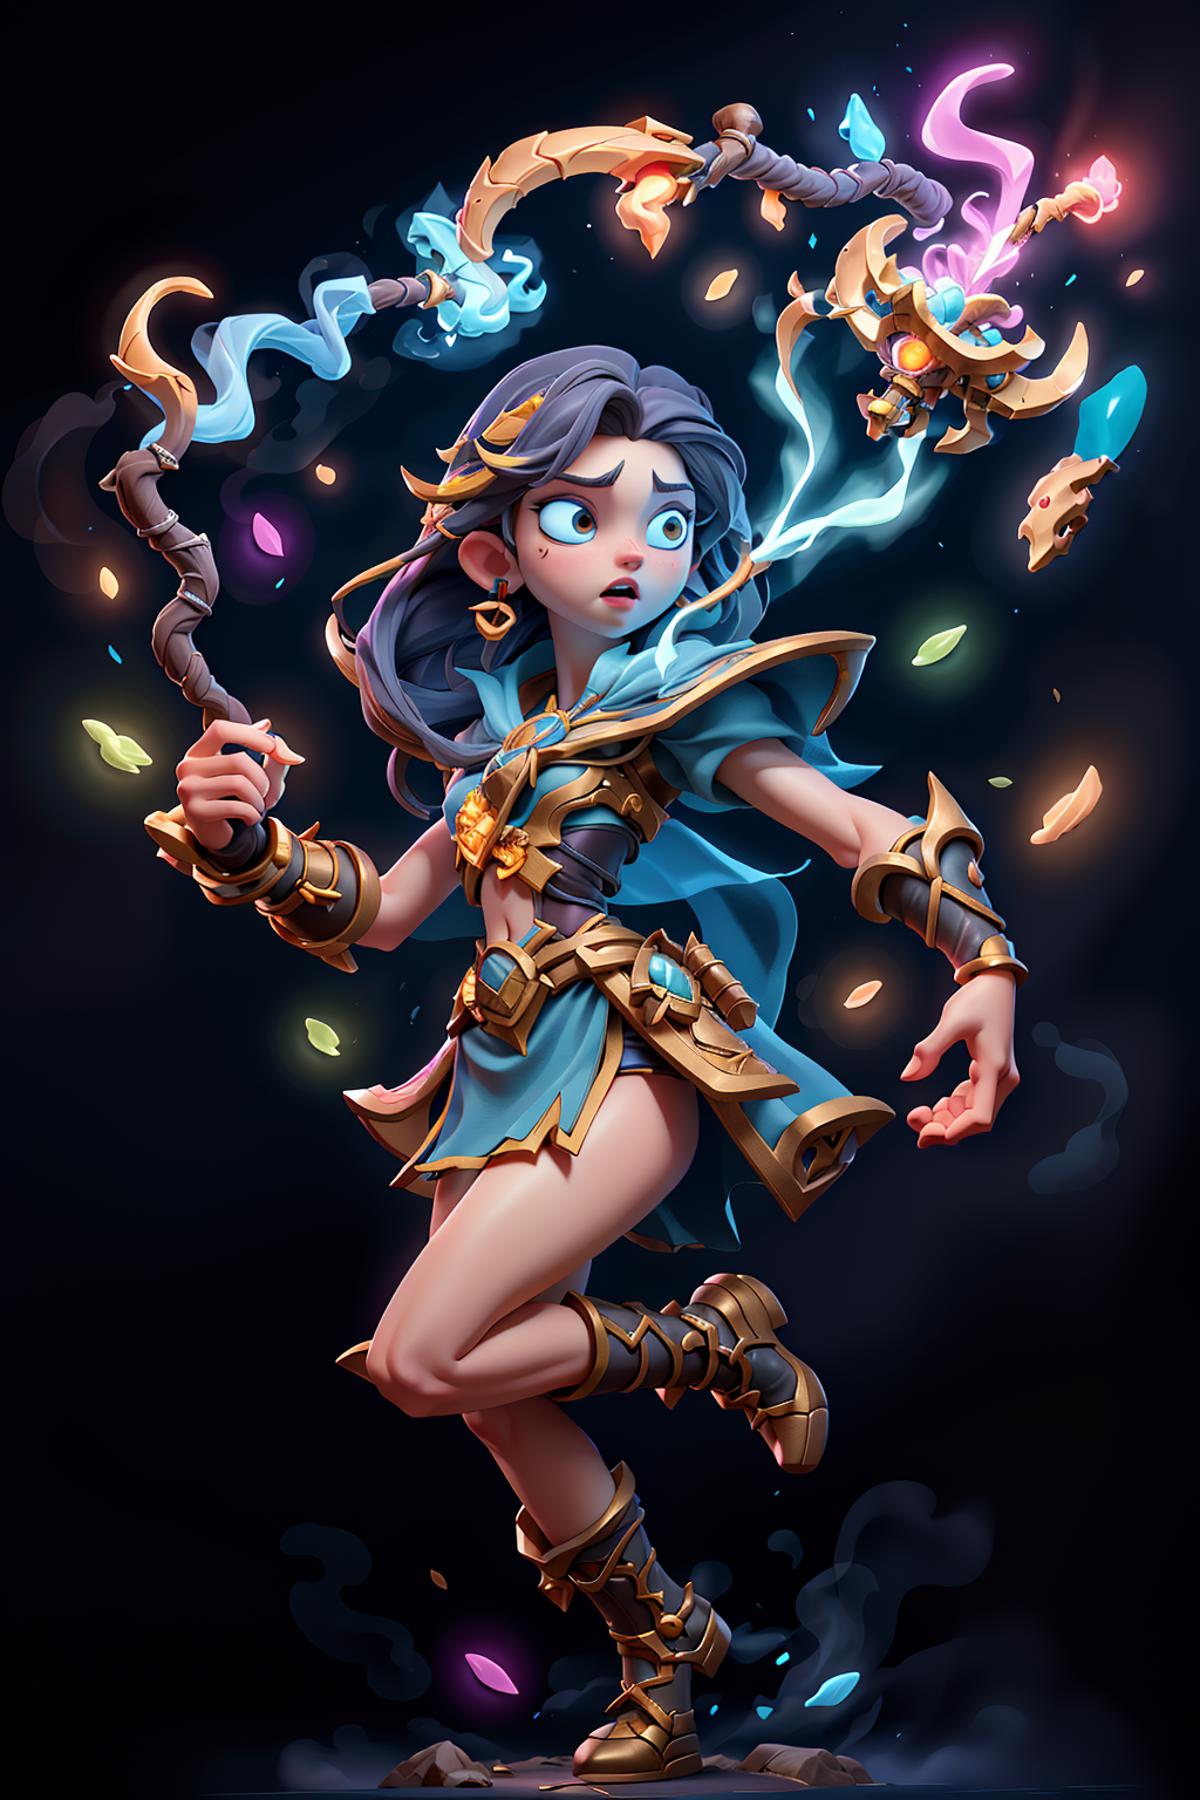 A cartoon illustration of a woman with blue hair and a blue dress, holding a wand and surrounded by stars and fire.